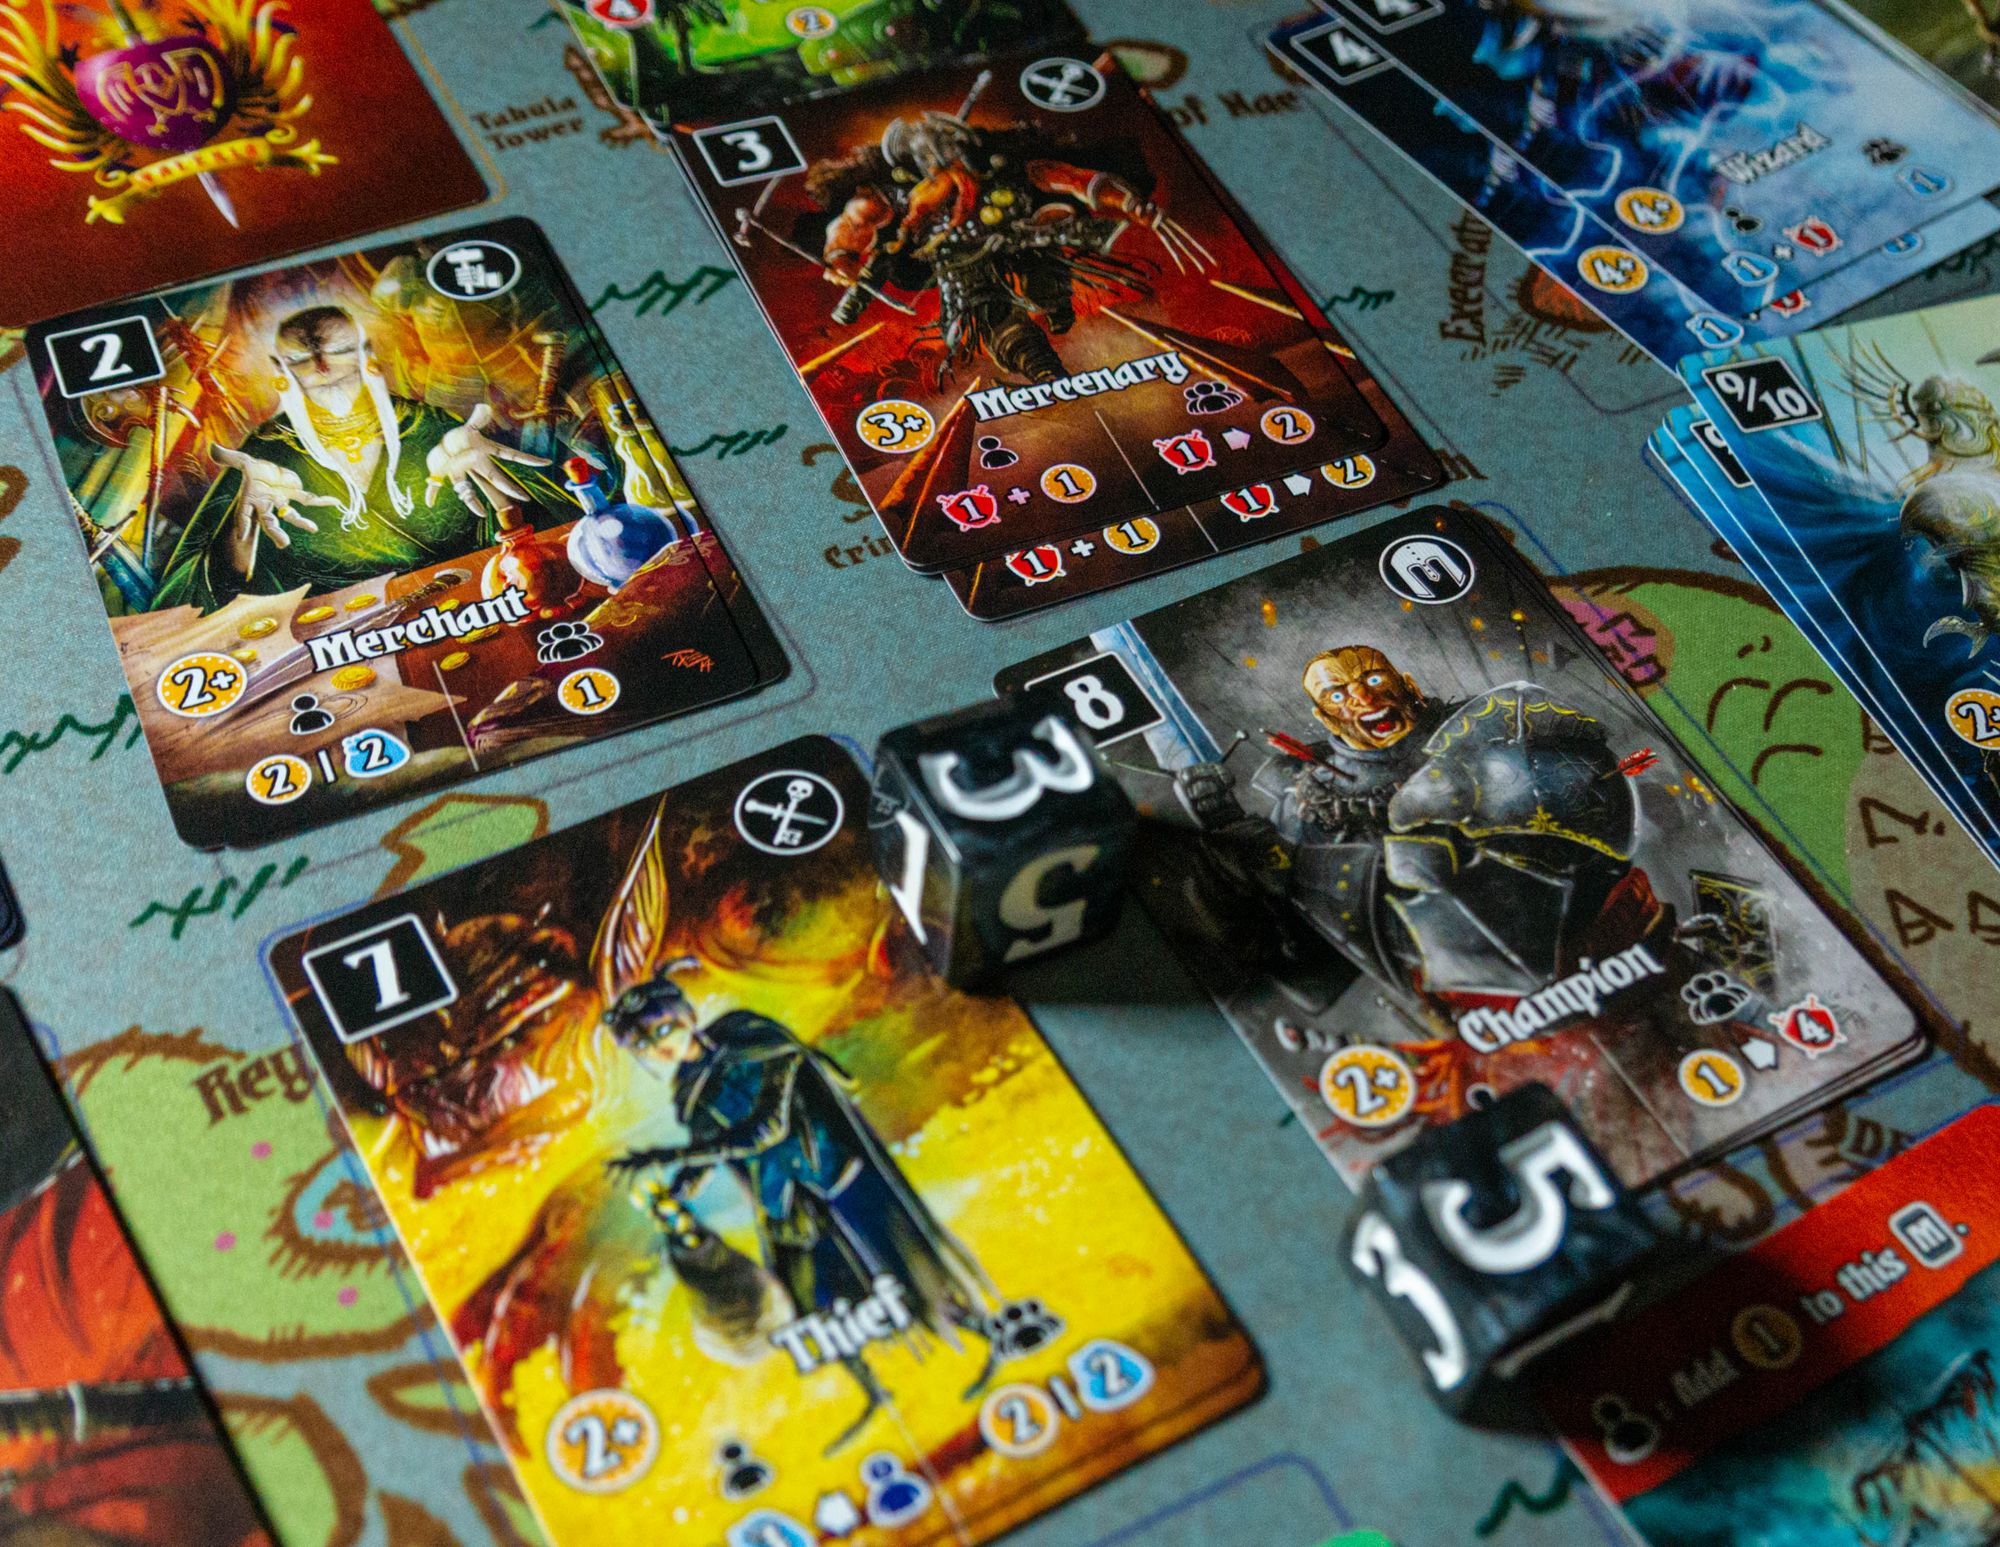 Dice Kingdoms of Valeria Review - Not All Games Need A Roll